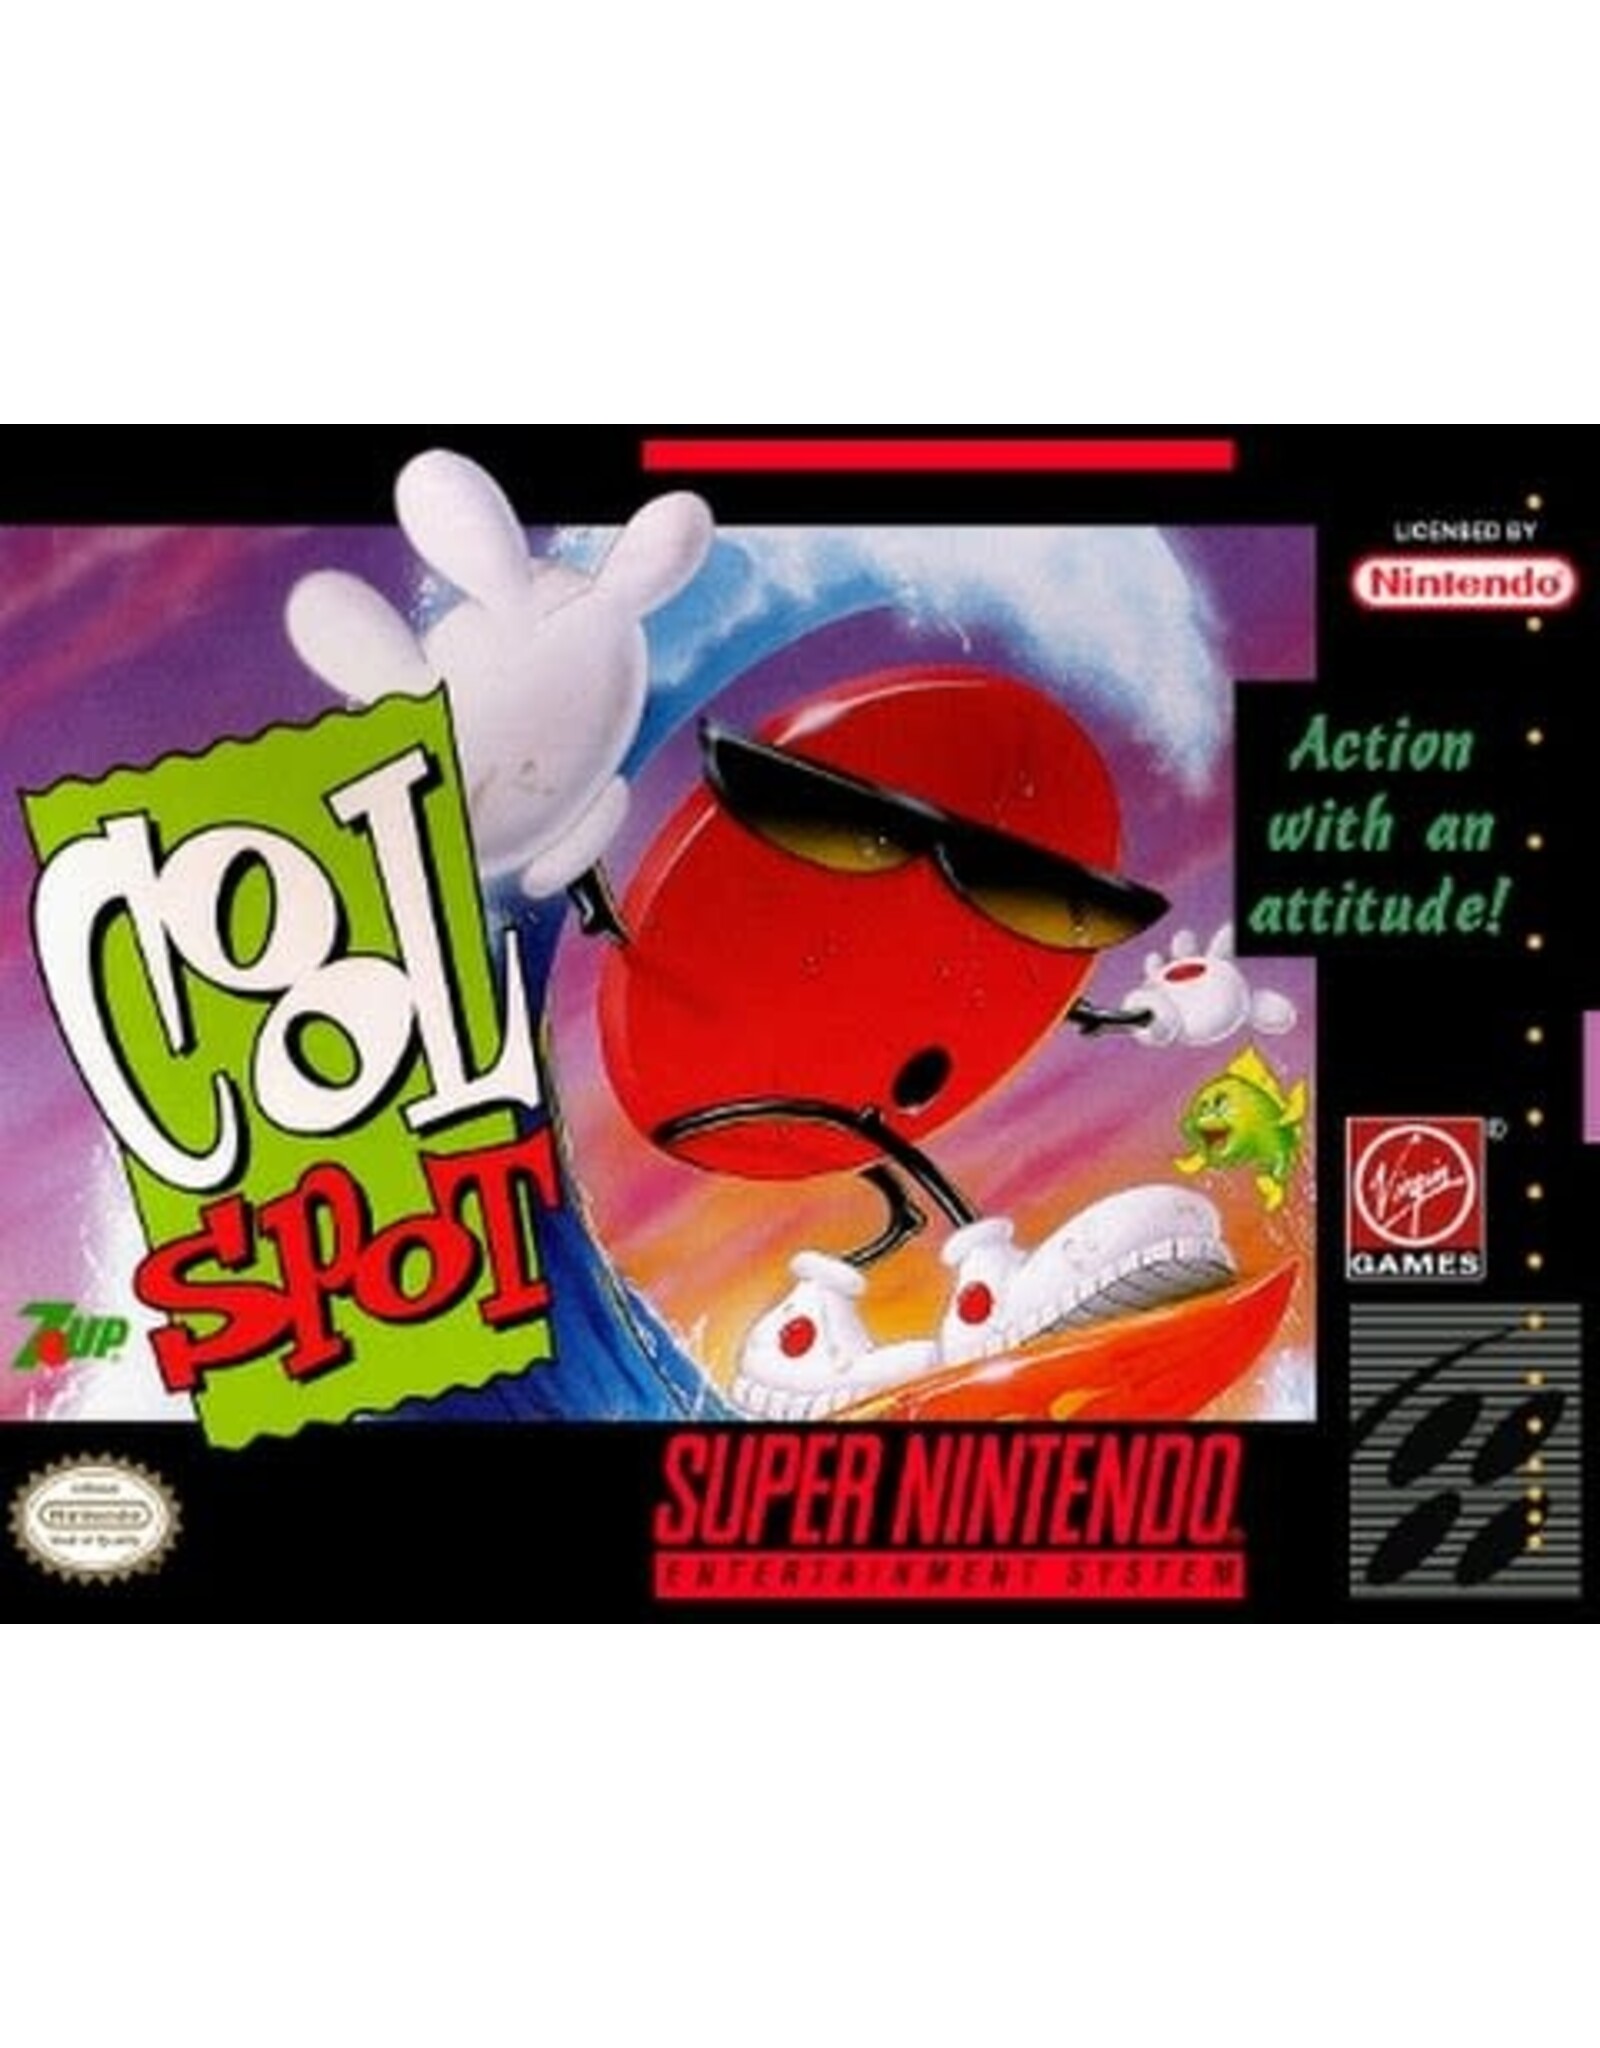 Super Nintendo Cool Spot (Used, Cart Only)